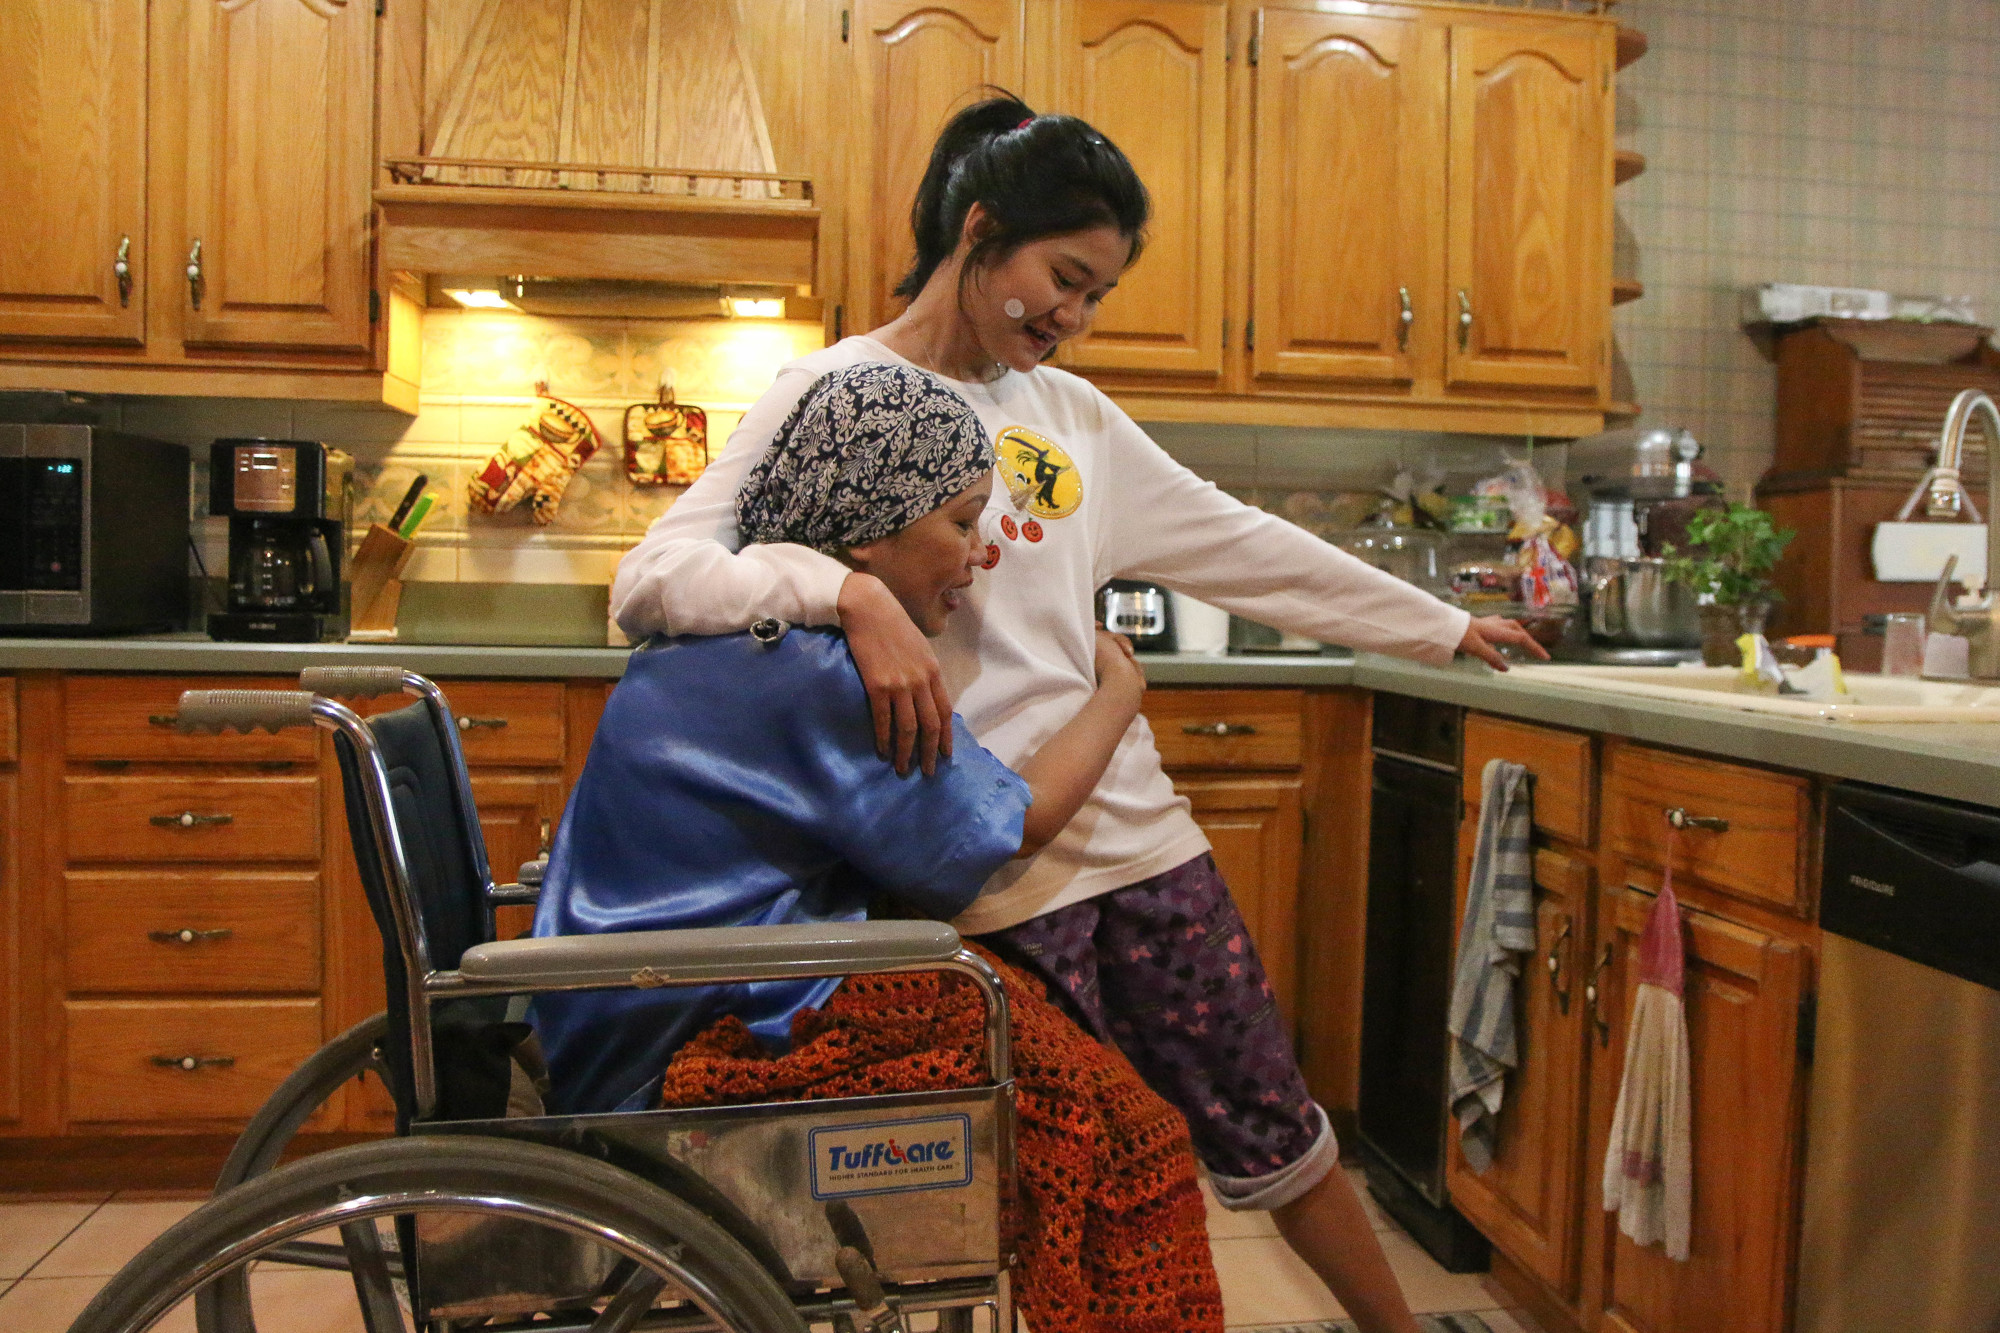 Lexie Peck shares a moment with her youngest daughter, Chelsea Ramirez, in the kitchen. Photo by Paige Wilson